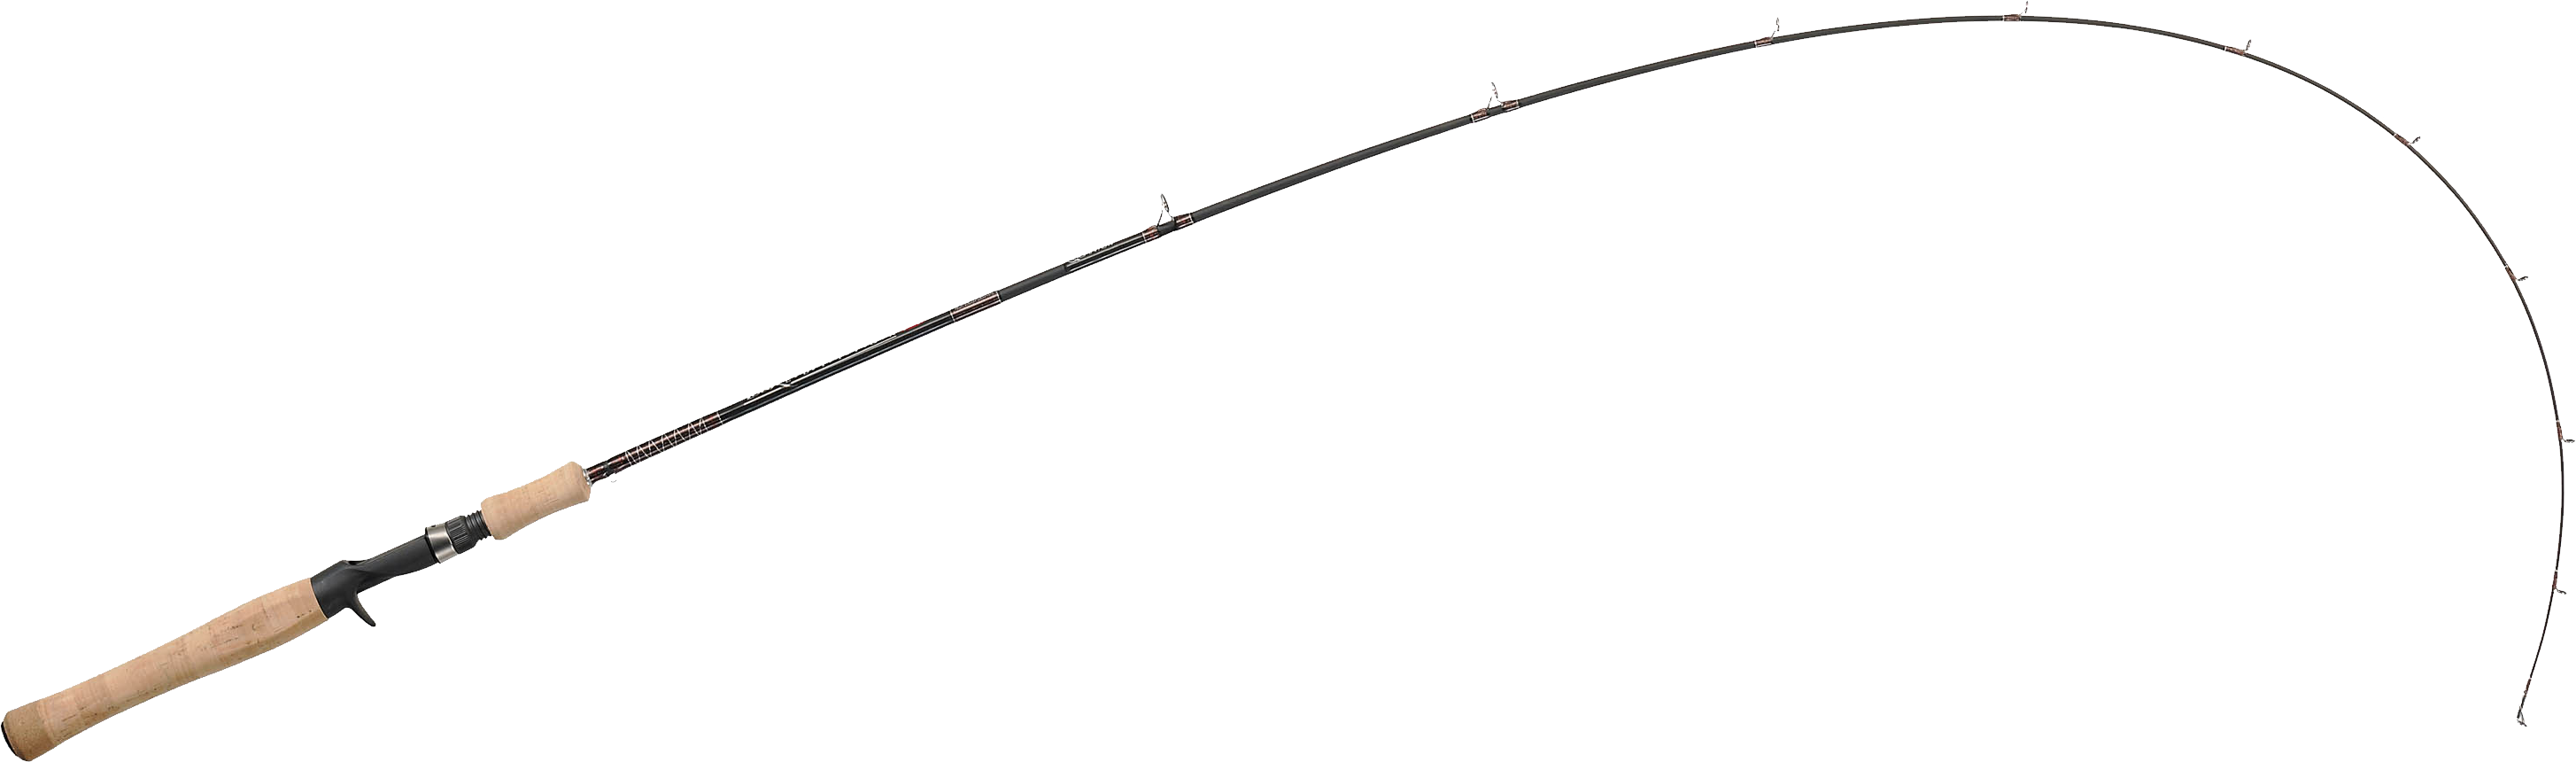 Pole Rod Stick Fishing Free Clipart HQ PNG Image